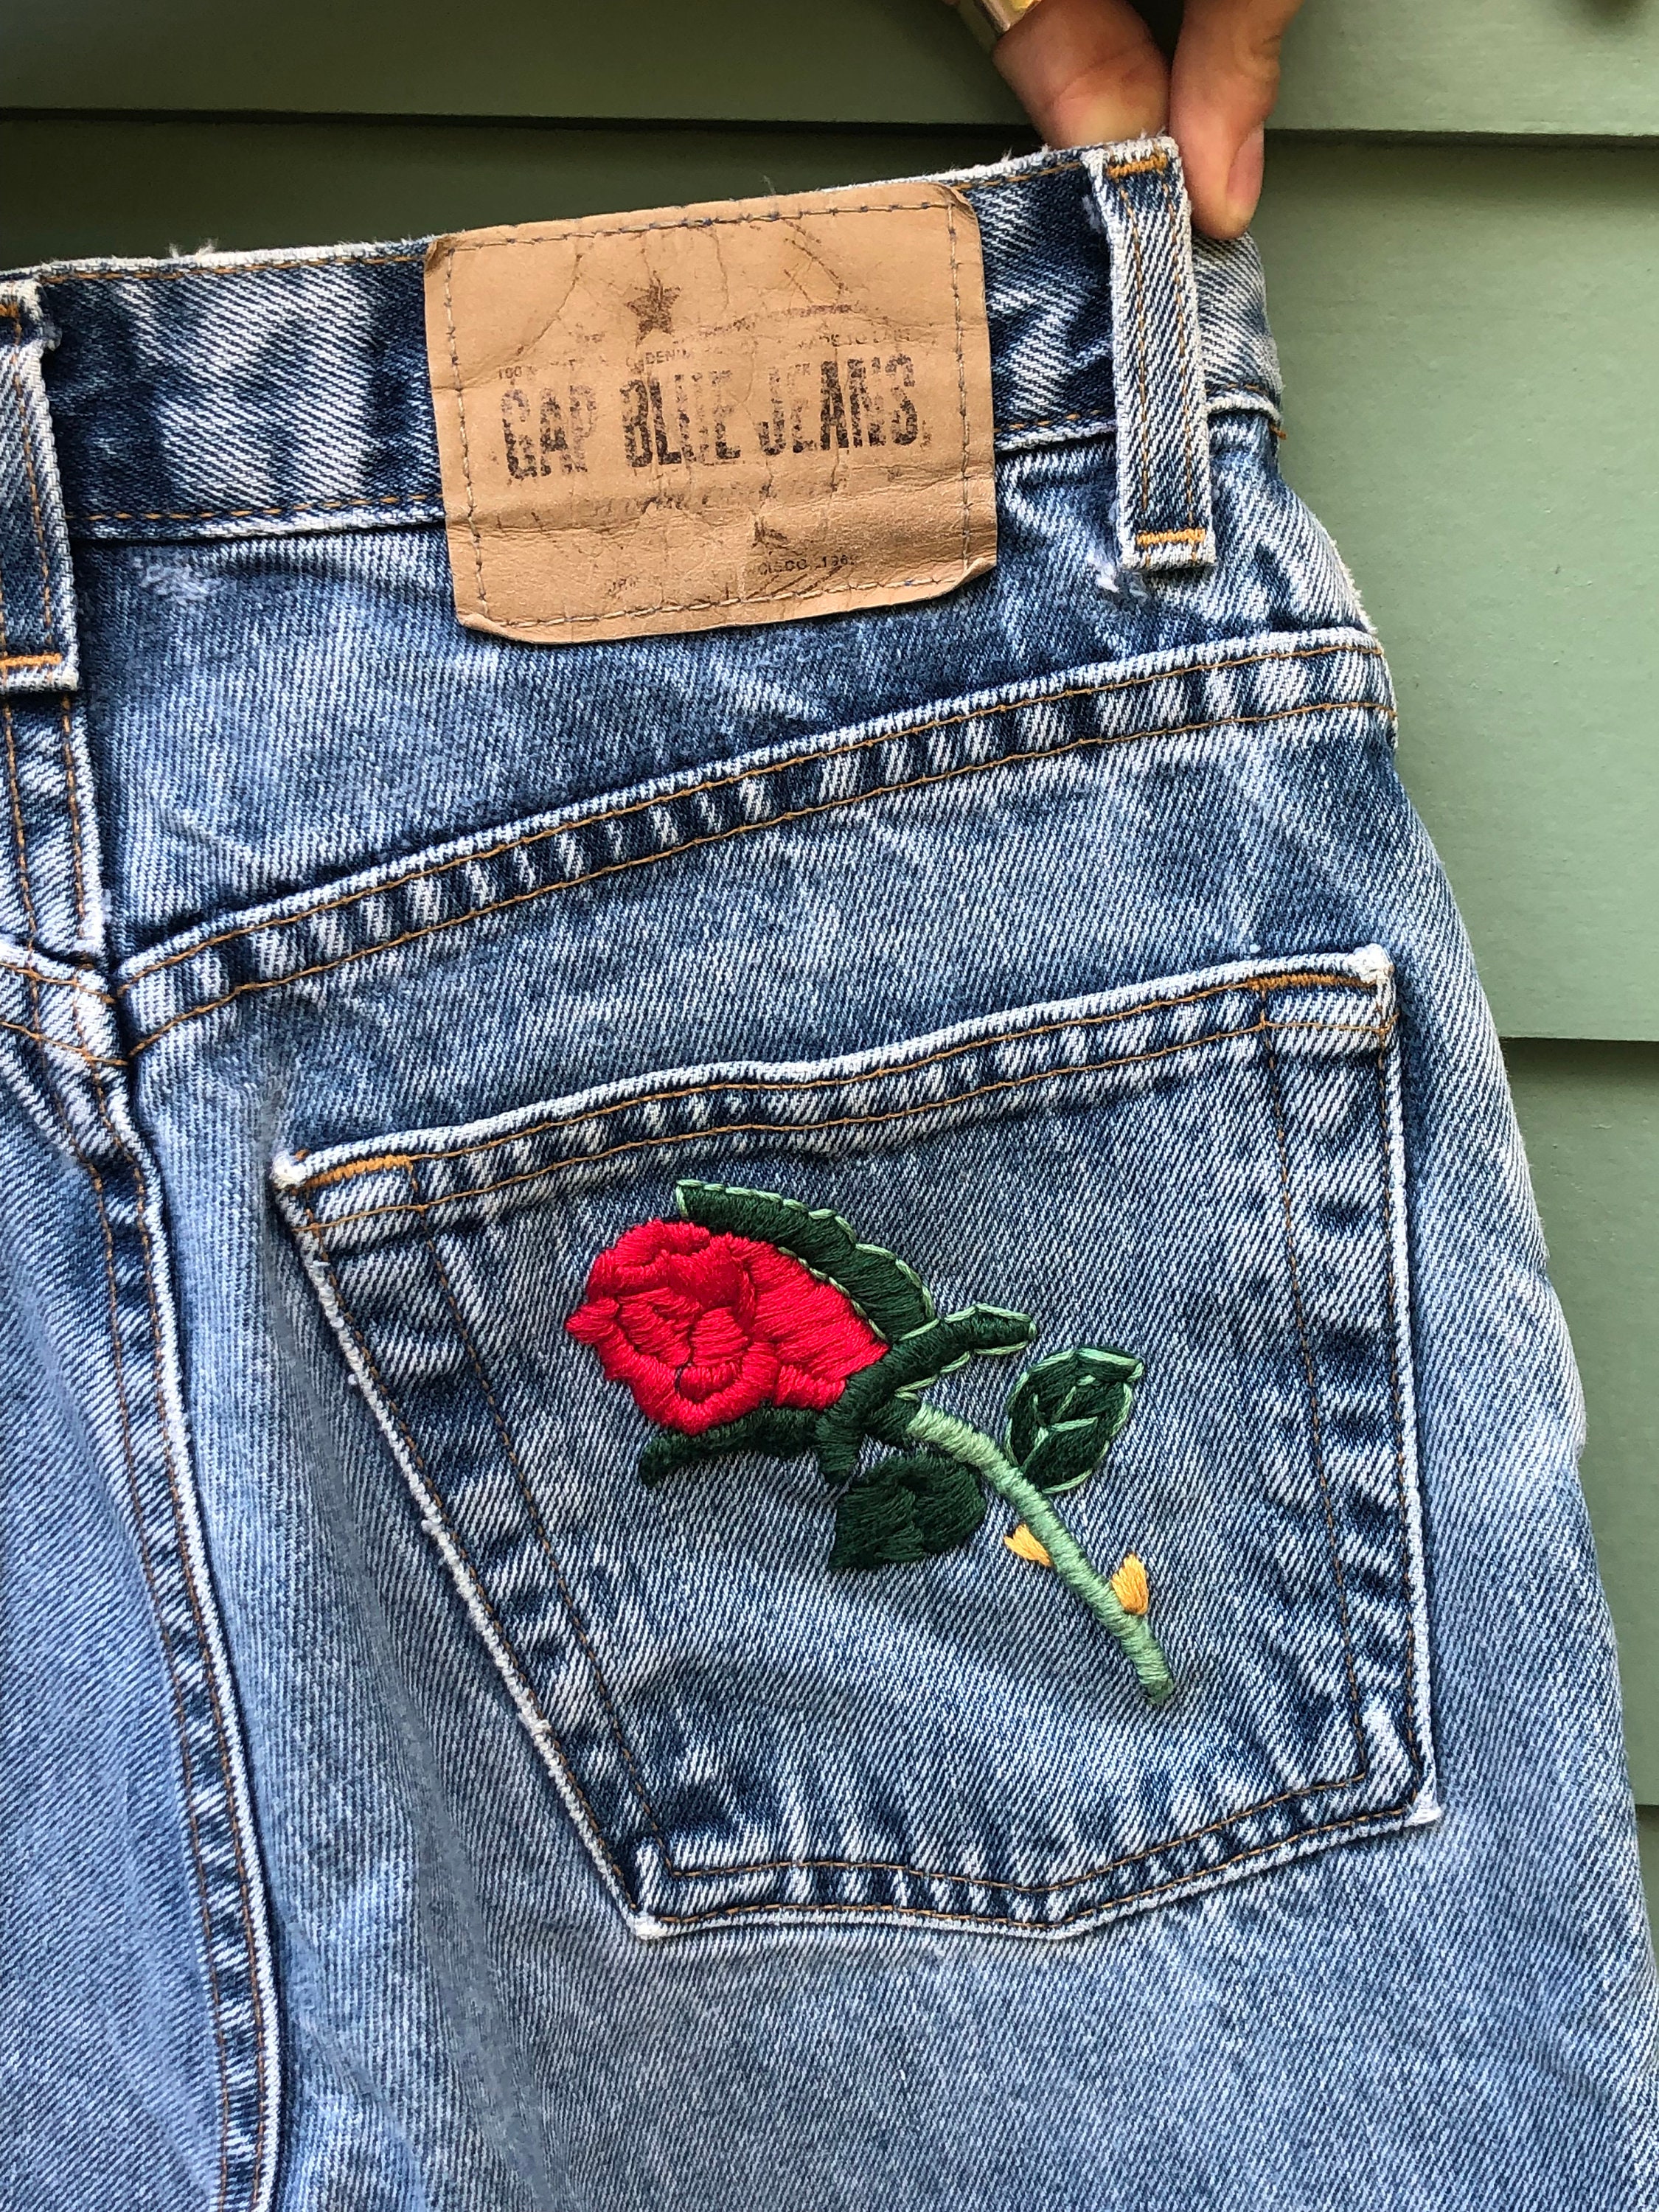 Jeans Etsy